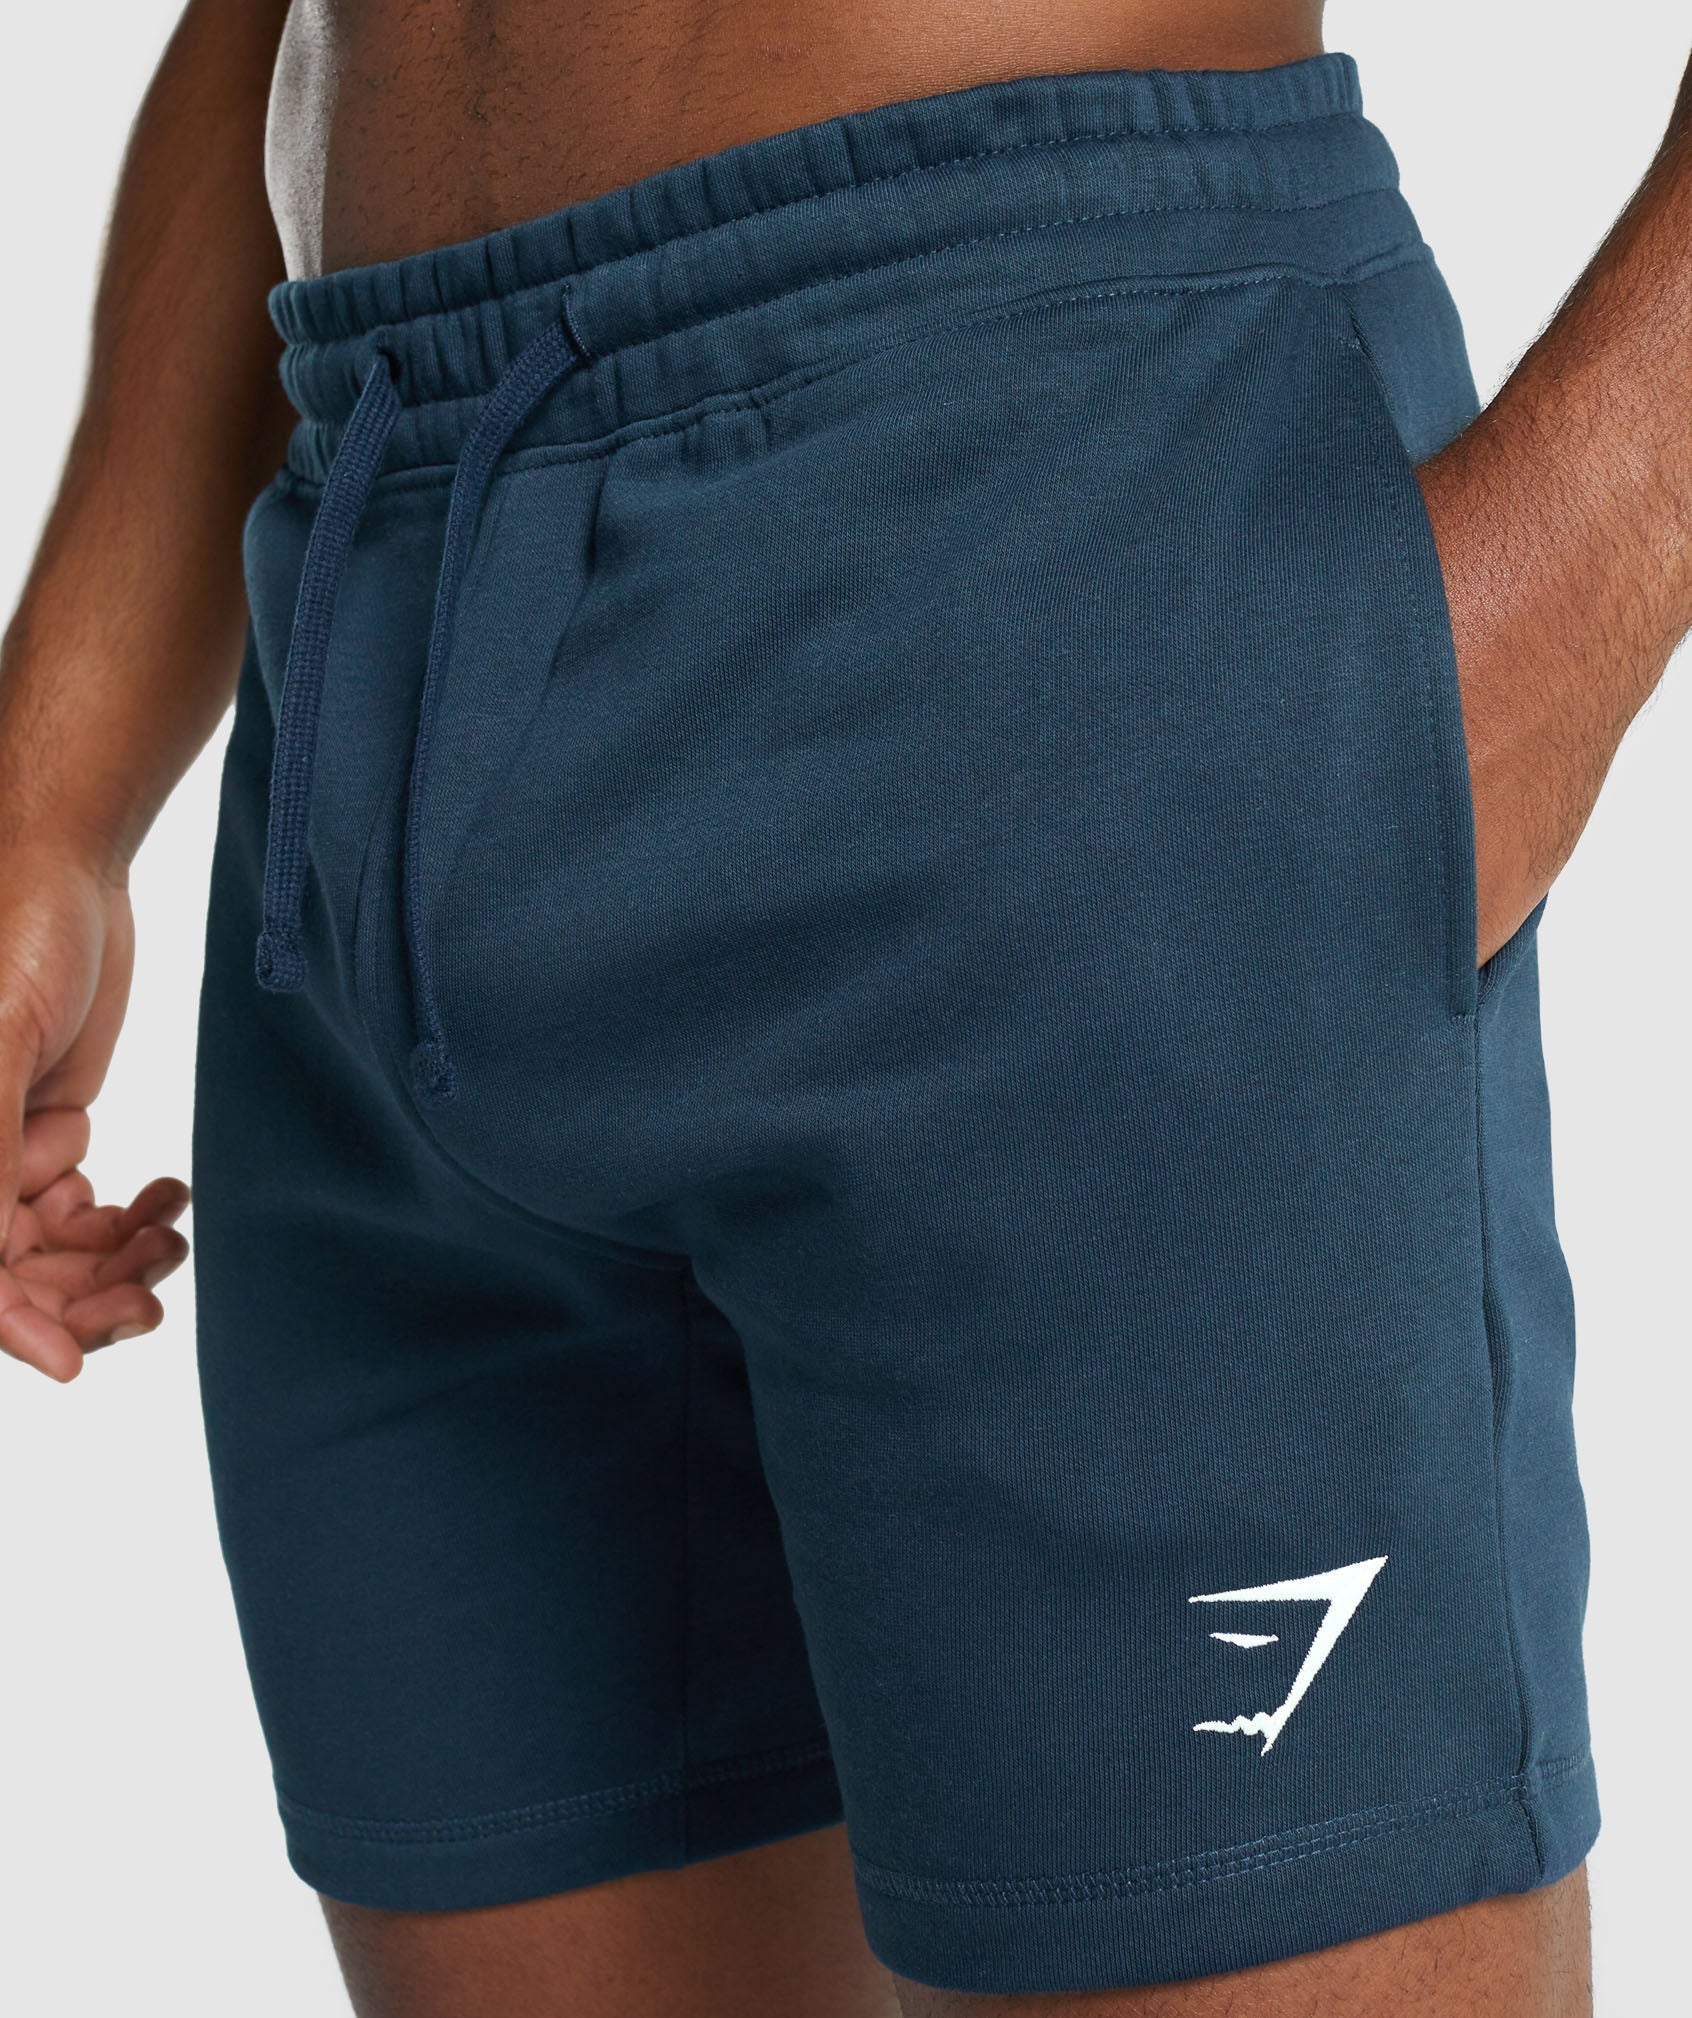 Crest Shorts in Navy - view 4